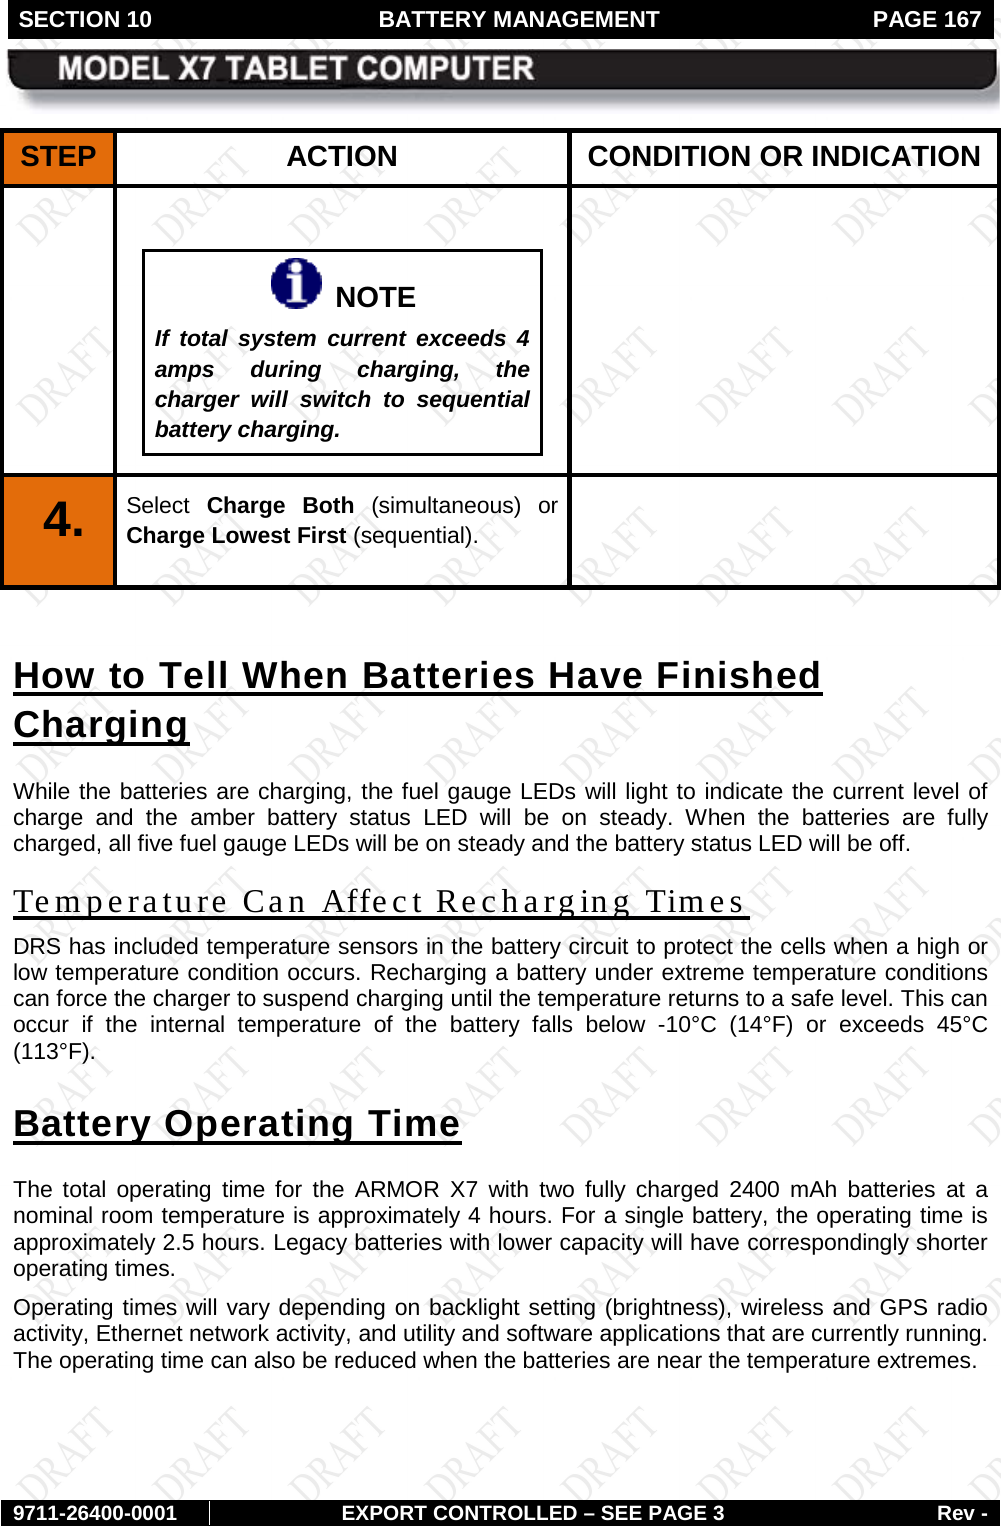 SECTION 10 BATTERY MANAGEMENT  PAGE 167        9711-26400-0001 EXPORT CONTROLLED – SEE PAGE 3 Rev - STEP  ACTION CONDITION OR INDICATION     NOTE If total system current exceeds 4 amps during charging, the charger will switch to sequential battery charging.   4.   Select  Charge Both (simultaneous) or Charge Lowest First (sequential).   How to Tell When Batteries Have Finished Charging While the batteries are charging, the fuel gauge LEDs will light to indicate the current level of charge and the  amber battery status LED will be on steady. When the batteries are fully charged, all five fuel gauge LEDs will be on steady and the battery status LED will be off. Temperature Can Affect Recharging Times DRS has included temperature sensors in the battery circuit to protect the cells when a high or low temperature condition occurs. Recharging a battery under extreme temperature conditions can force the charger to suspend charging until the temperature returns to a safe level. This can occur if the internal temperature of the battery falls below -10°C (14°F) or exceeds 45°C (113°F).  Battery Operating Time The total operating time for the ARMOR X7 with two fully charged 2400 mAh batteries  at a nominal room temperature is approximately 4 hours. For a single battery, the operating time is approximately 2.5 hours. Legacy batteries with lower capacity will have correspondingly shorter operating times.  Operating times will vary depending on backlight setting (brightness), wireless and GPS radio activity, Ethernet network activity, and utility and software applications that are currently running. The operating time can also be reduced when the batteries are near the temperature extremes.  